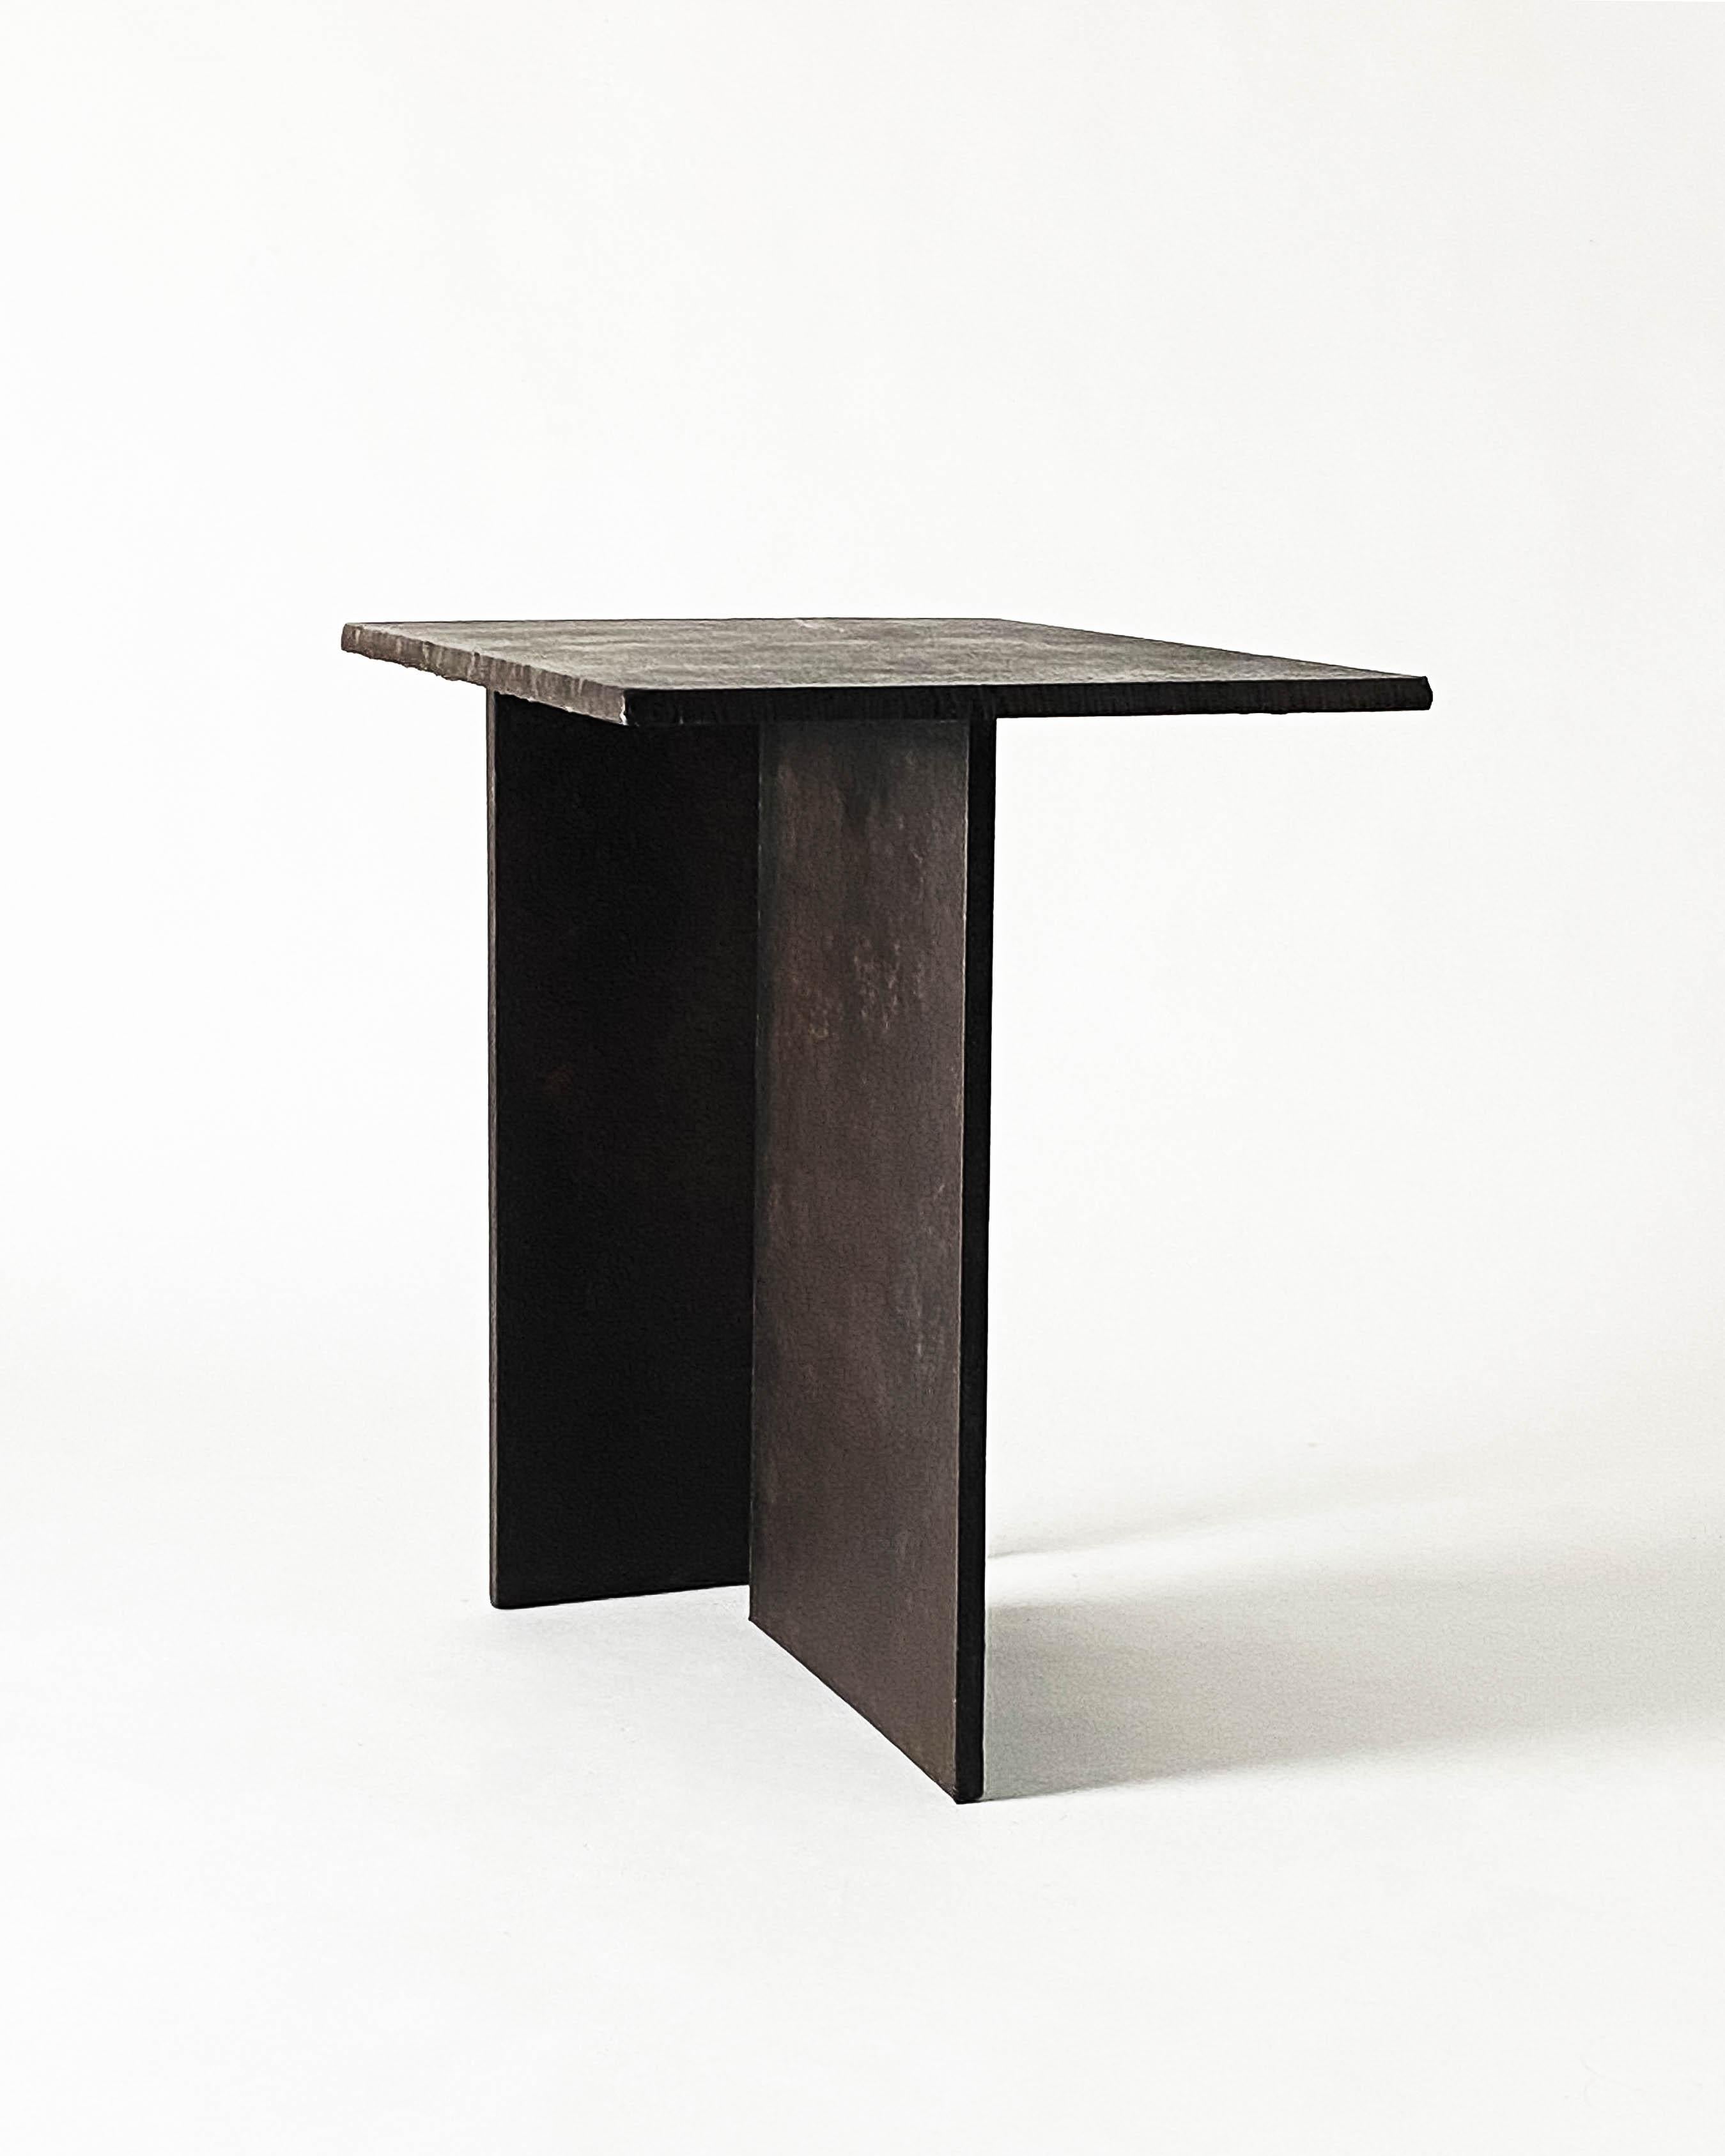 Level Table by Cal Summers
Dimension:  W 42 x D 30.48  x H 43.18 cm
Materials: Solid Steel, Heavily Rusted.

Cal Summers is a British designer who makes bespoke handmade furniture and contemporary artefacts in which he challenges the boundaries of